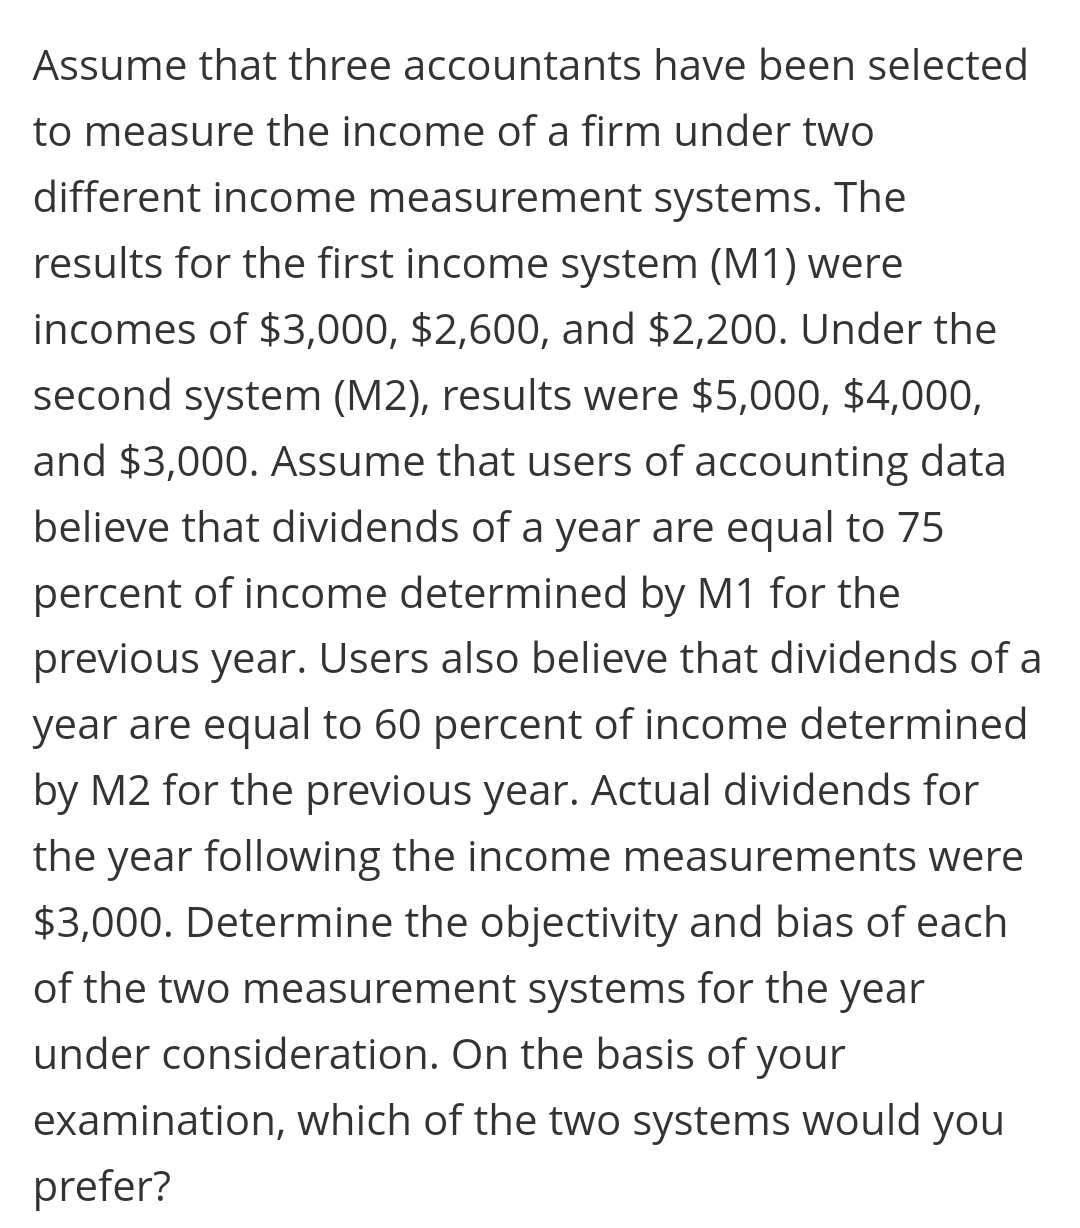 Assume that three accountants have been selected
to measure the income of a firm under two
different income measurement systems. The
results for the first income system (M1) were
incomes of $3,000, $2,600, and $2,200. Under the
second system (M2), results were $5,000, $4,000,
and $3,000. Assume that users of accounting data
believe that dividends of a year are equal to 75
percent of income determined by M1 for the
previous year. Users also believe that dividends of a
year are equal to 60 percent of income determined
by M2 for the previous year. Actual dividends for
the year following the income measurements were
$3,000. Determine the objectivity and bias of each
of the two measurement systems for the year
under consideration. On the basis of your
examination, which of the two systems would you
prefer?
